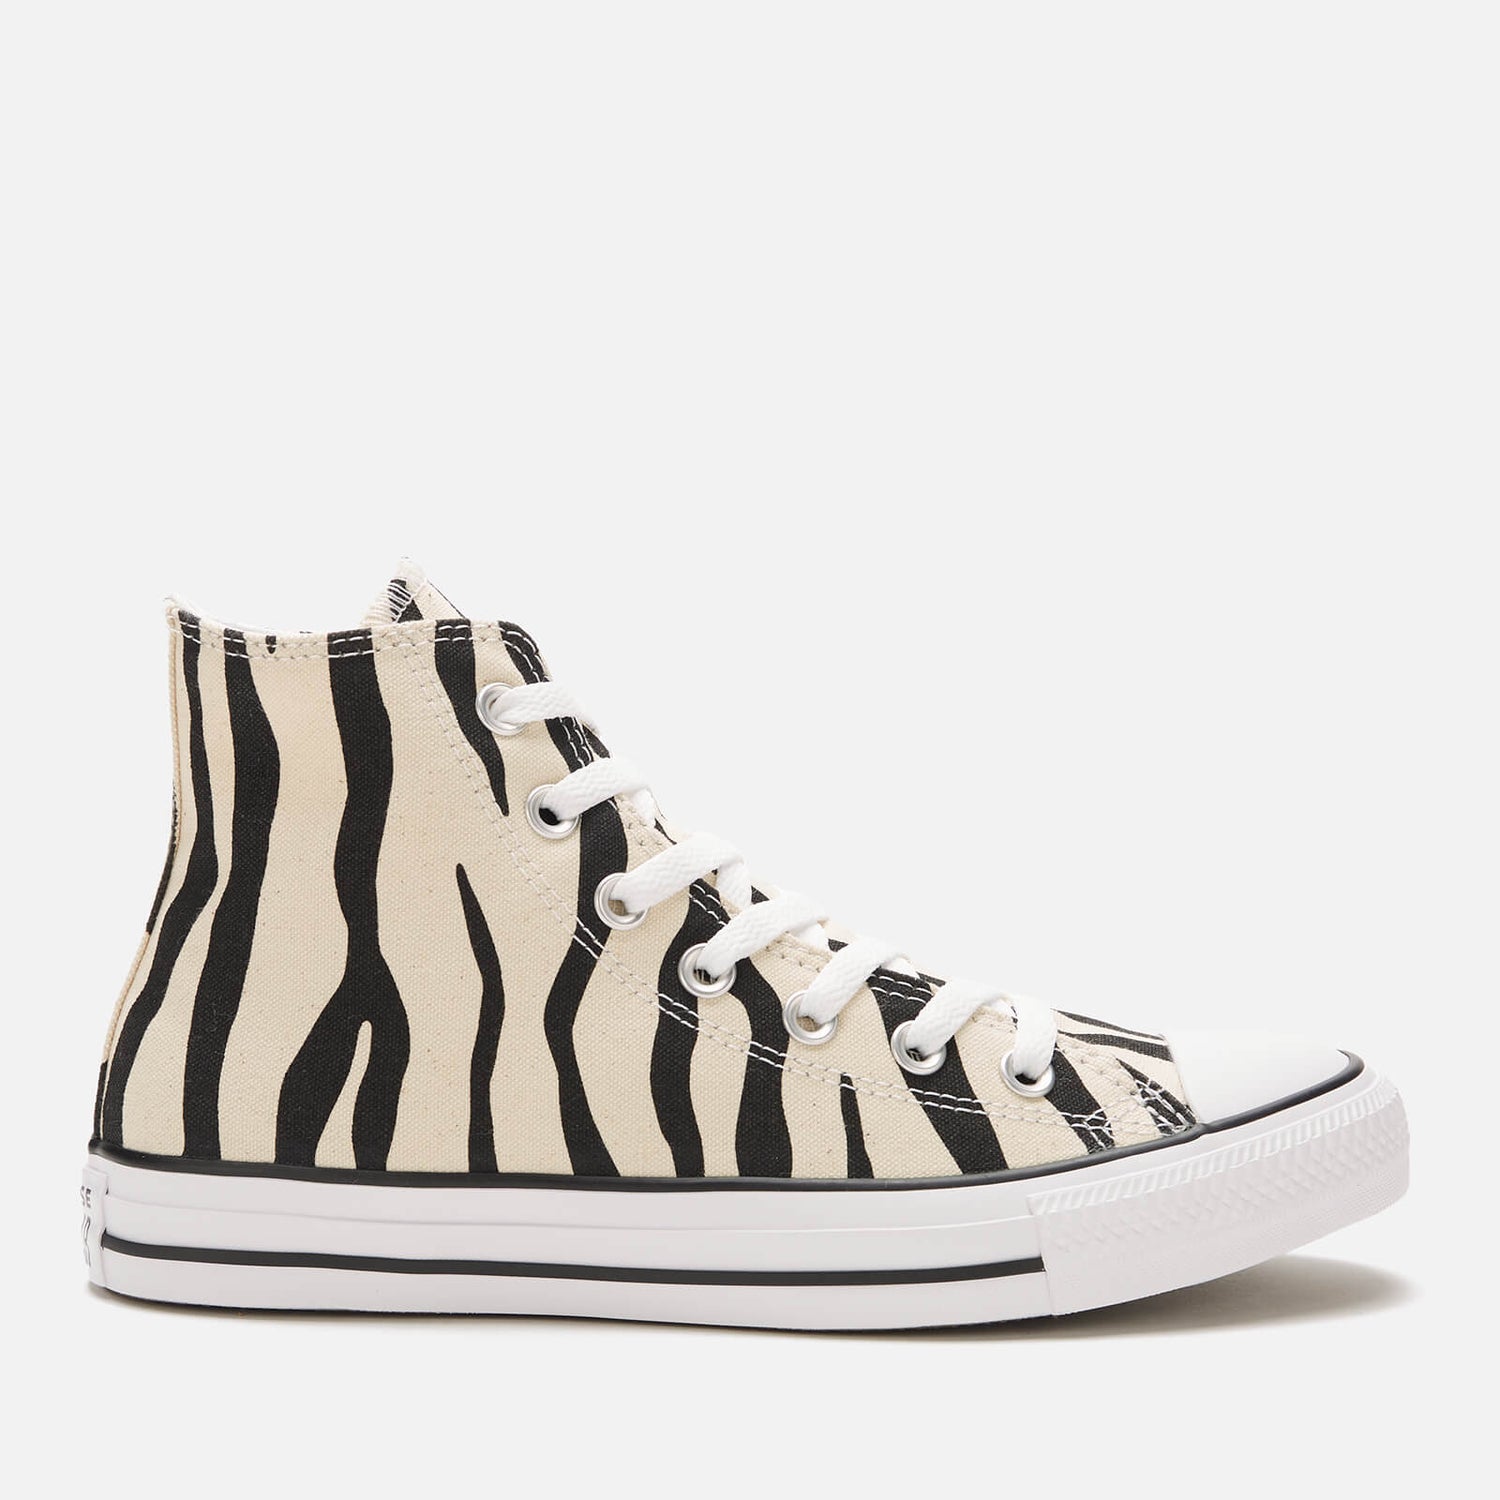 Converse Chuck Taylor All Star Canvas Archive Zebra Hi-Top Trainers - Black/Greige/White - UK 10